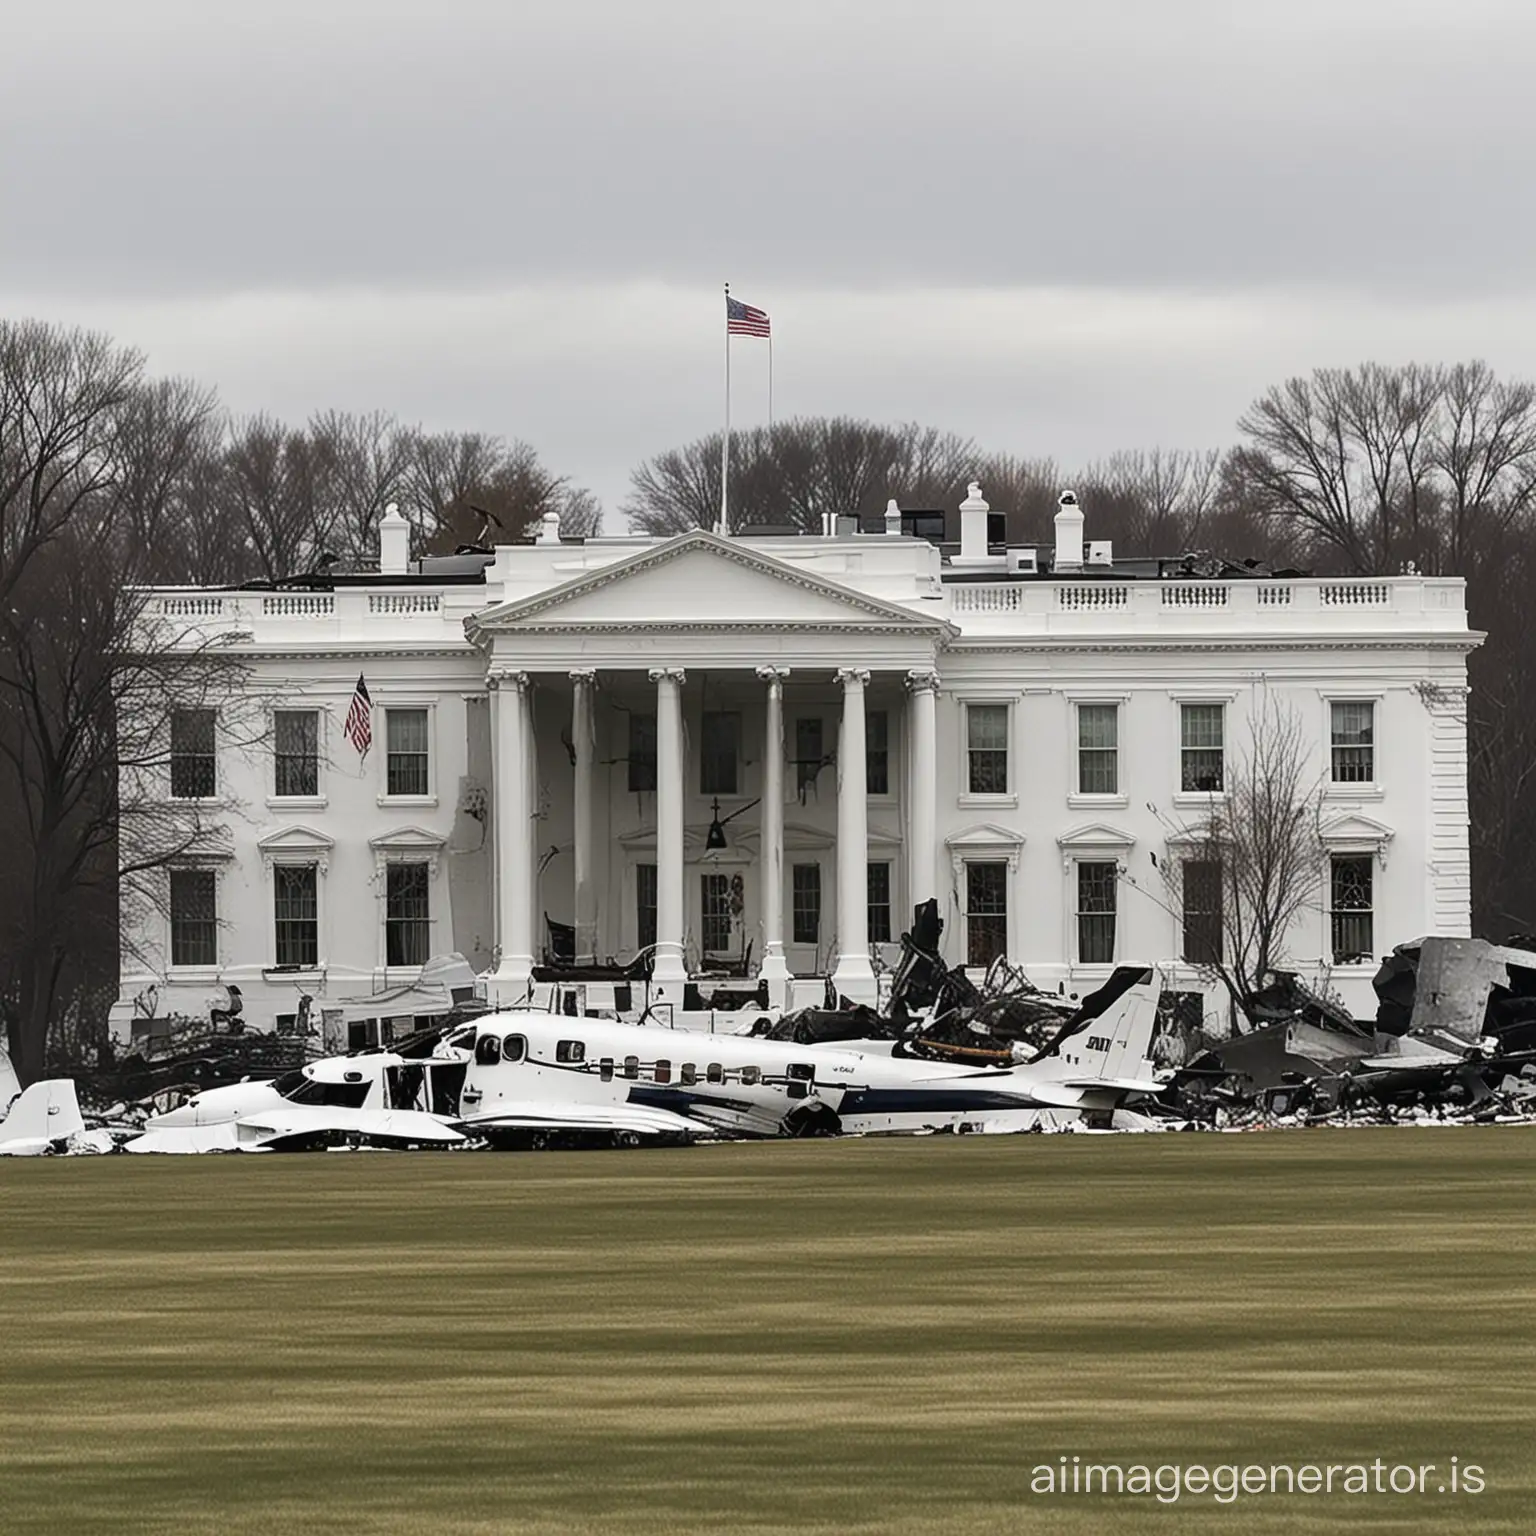 Aerial-View-of-White-House-Amidst-Plane-Crash-in-the-USA